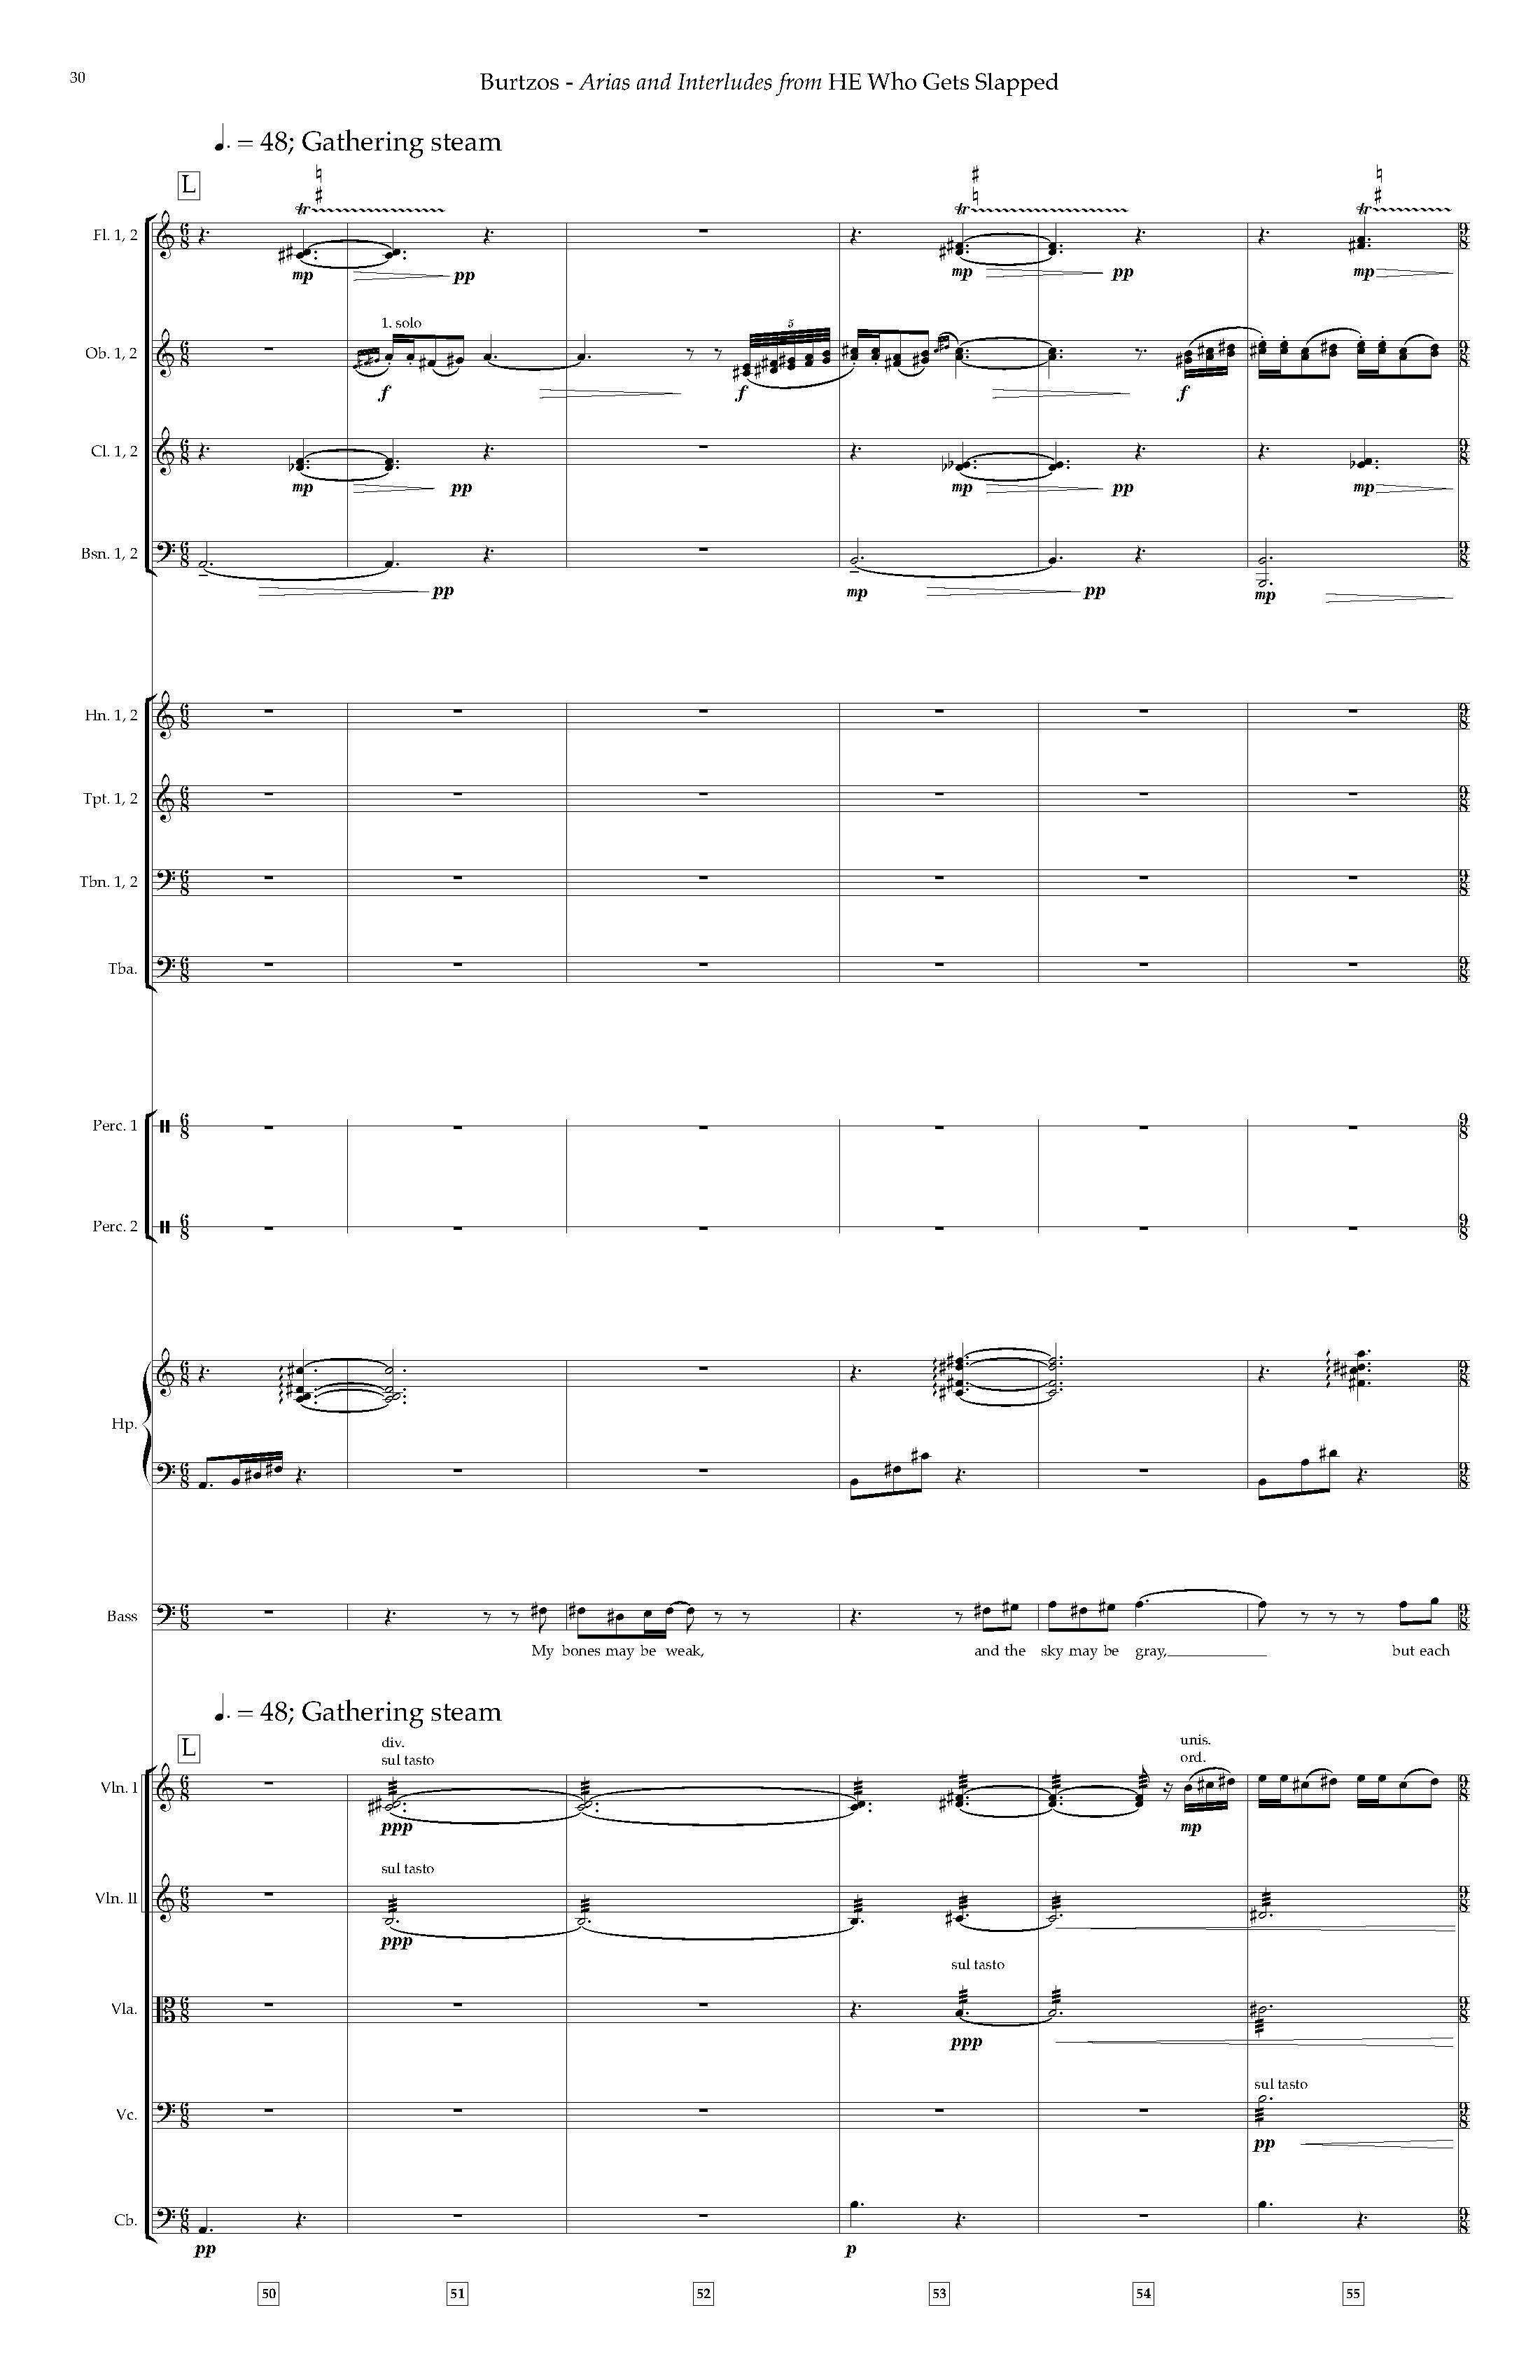 Arias and Interludes from HWGS - Complete Score_Page_36.jpg